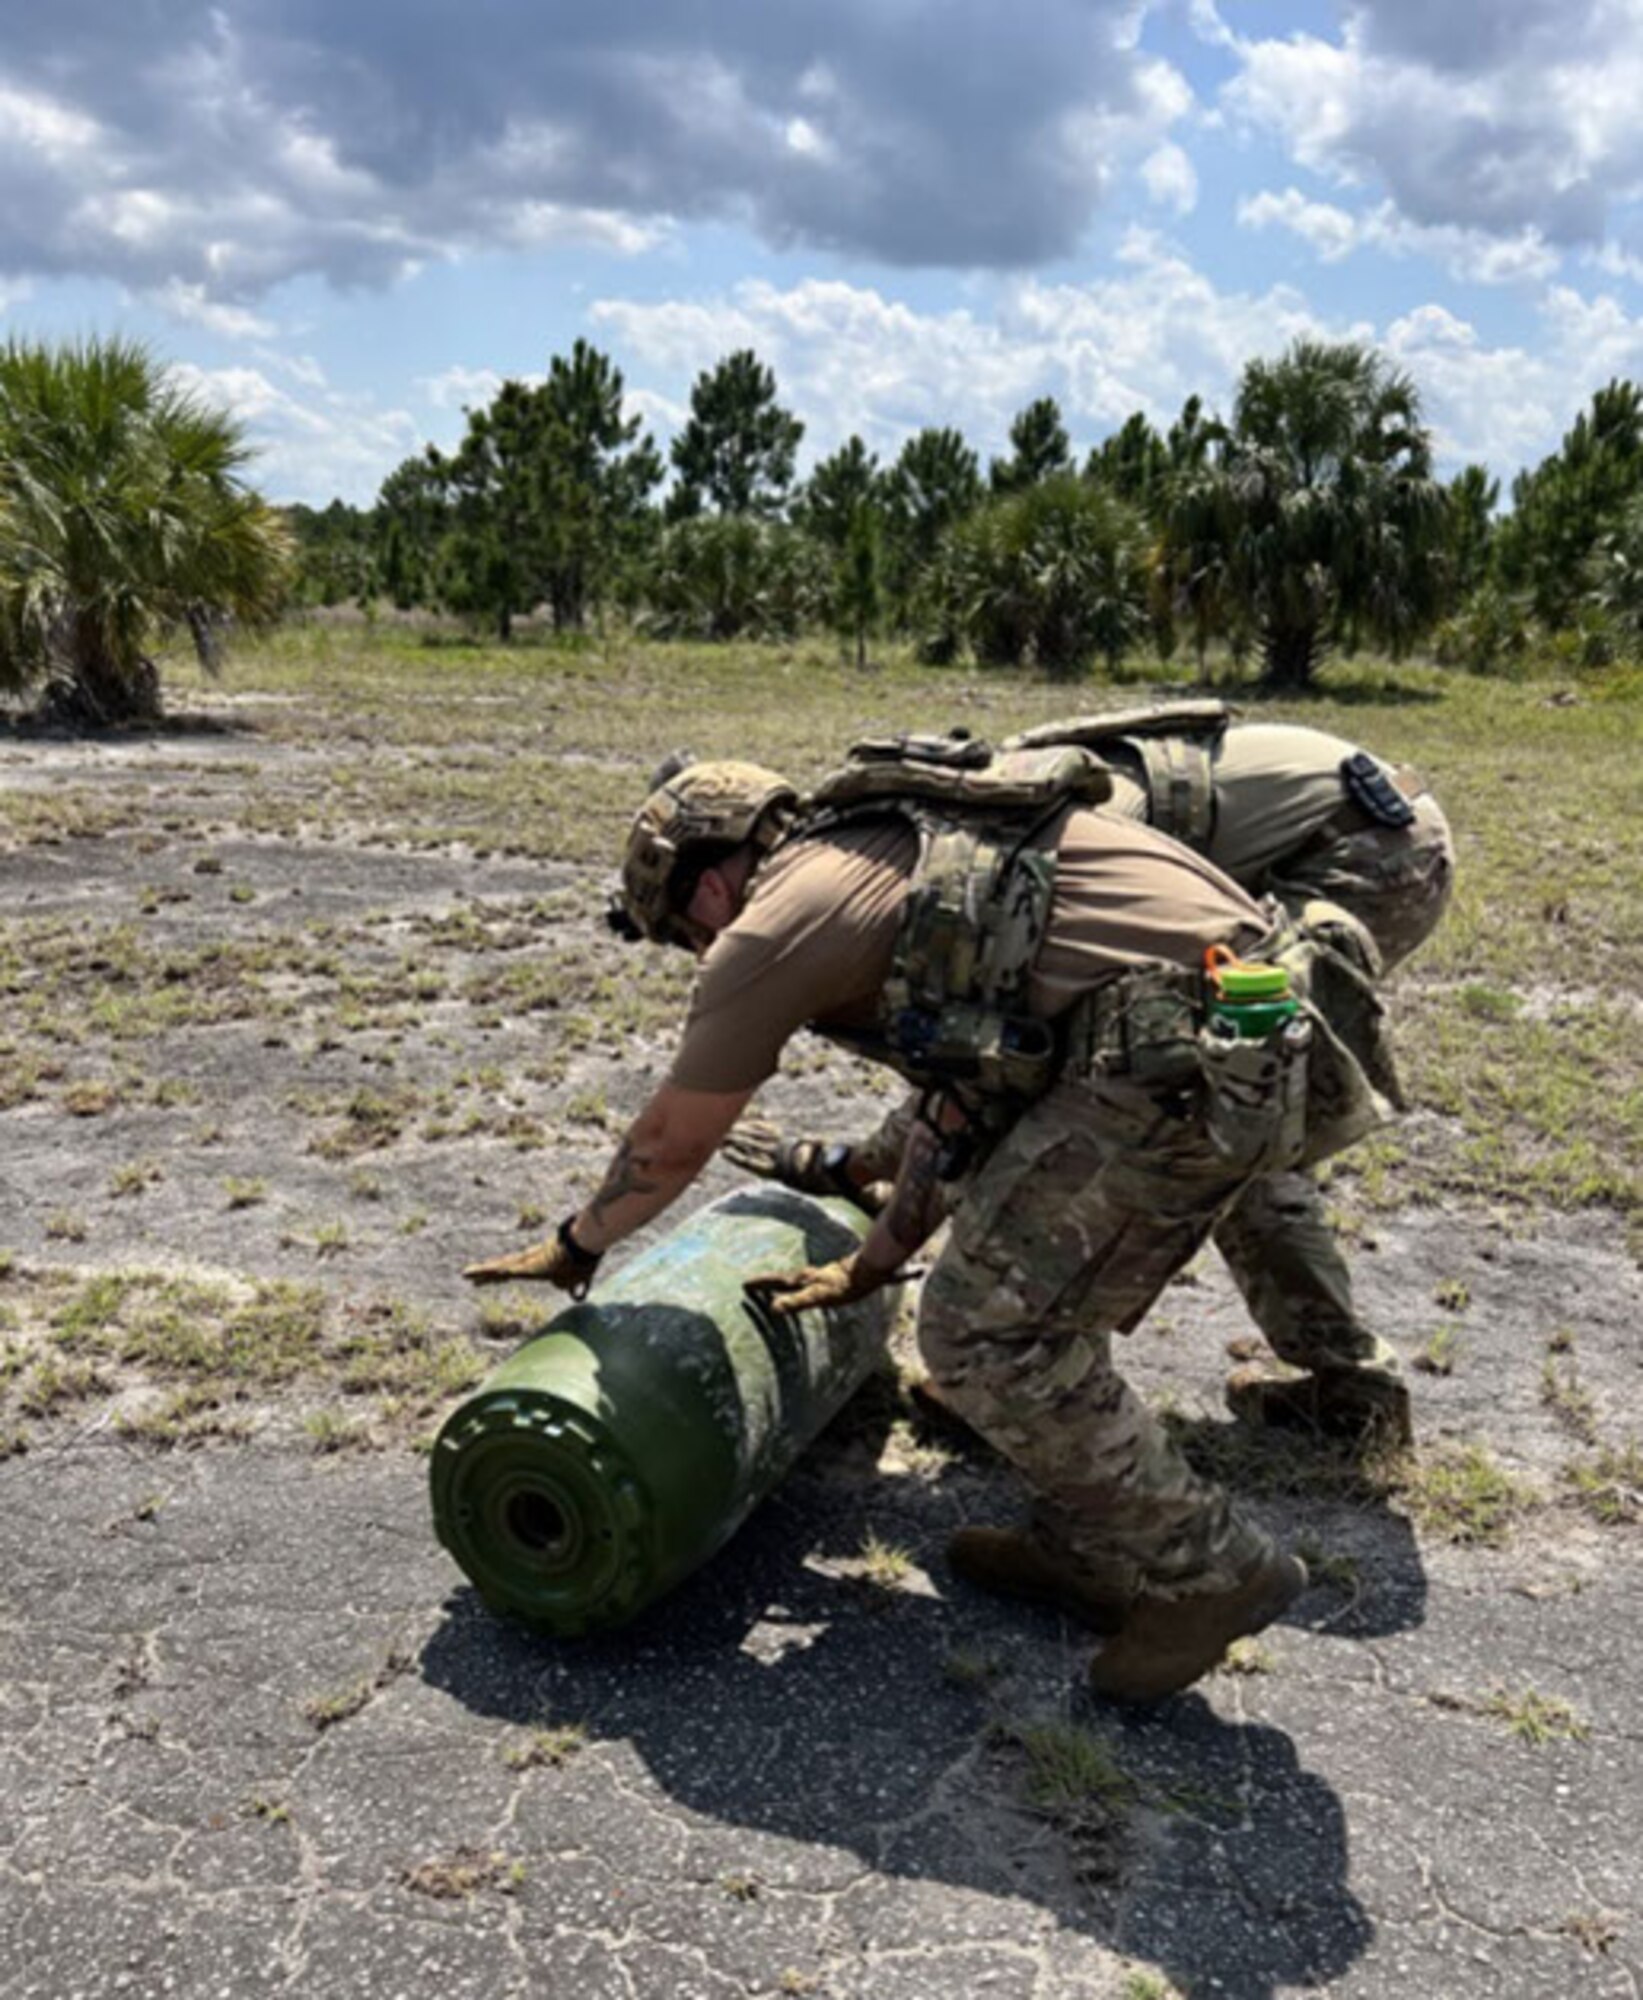 Explosive Ordnance Disposal teams from Fort Stewart, Ga., MacDill Air Force Base (AFB), Fla., Moody AFB, Ga., Cape Canaveral Space Force Station, Fla., and Homestead Air Reserve Base, Fla., participate in a joint total force Agile Combat Employment exercise from May 9-11, 2023, in Palm Bay, Fla. The exercise featured 17 unique scenarios to challenge and enhance their abilities in airbase recovery post-attack and in overcoming area denial techniques. (Courtesy photo by U.S. Air Force Master Sgt. Nicholas Graham)